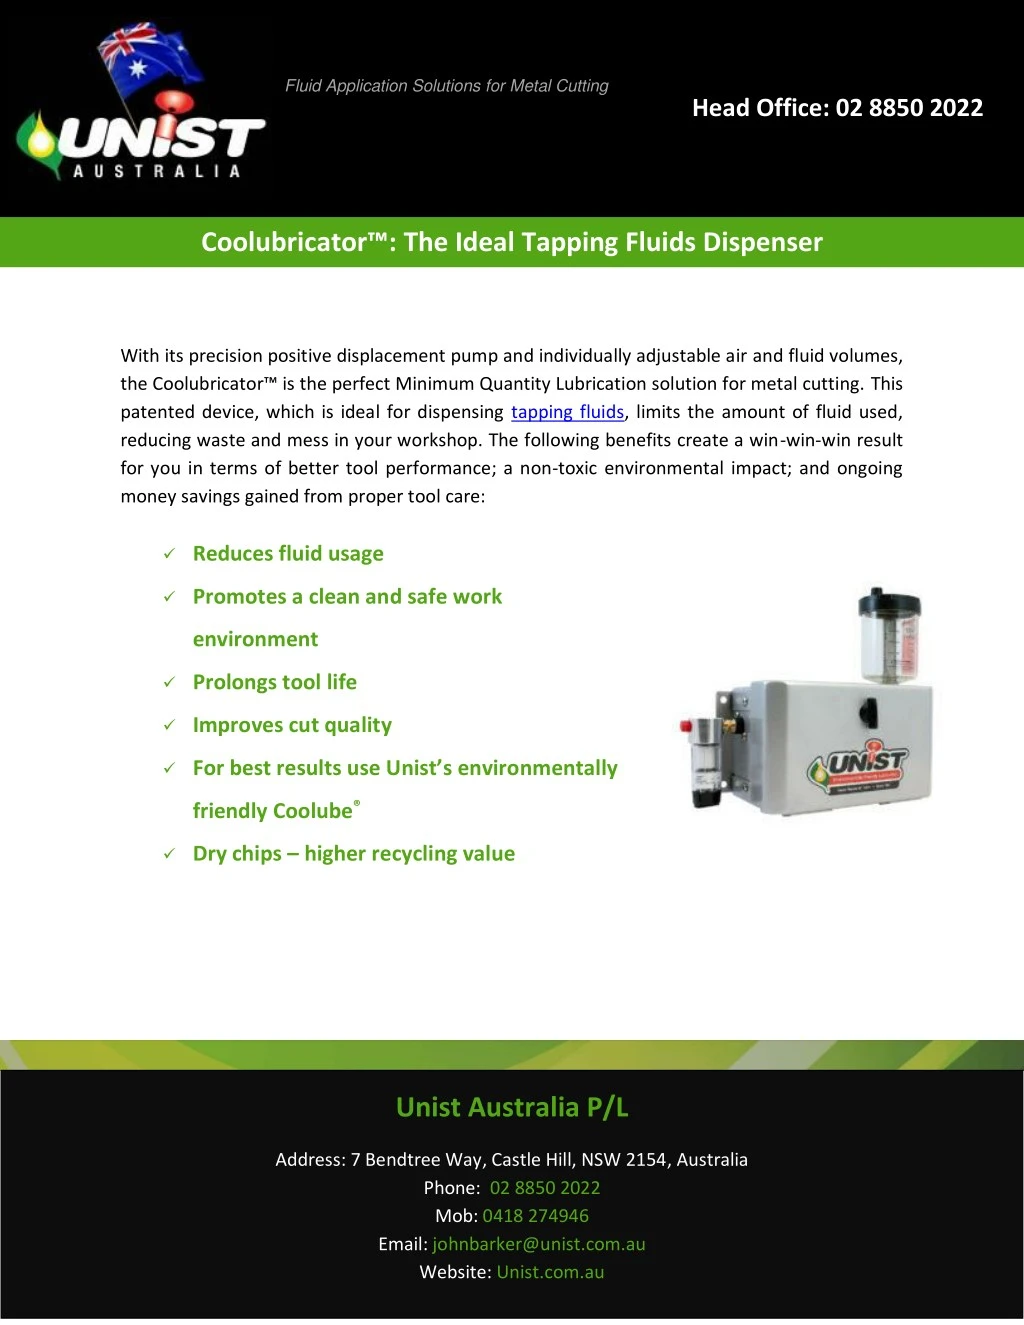 fluid application solutions for metal cutting